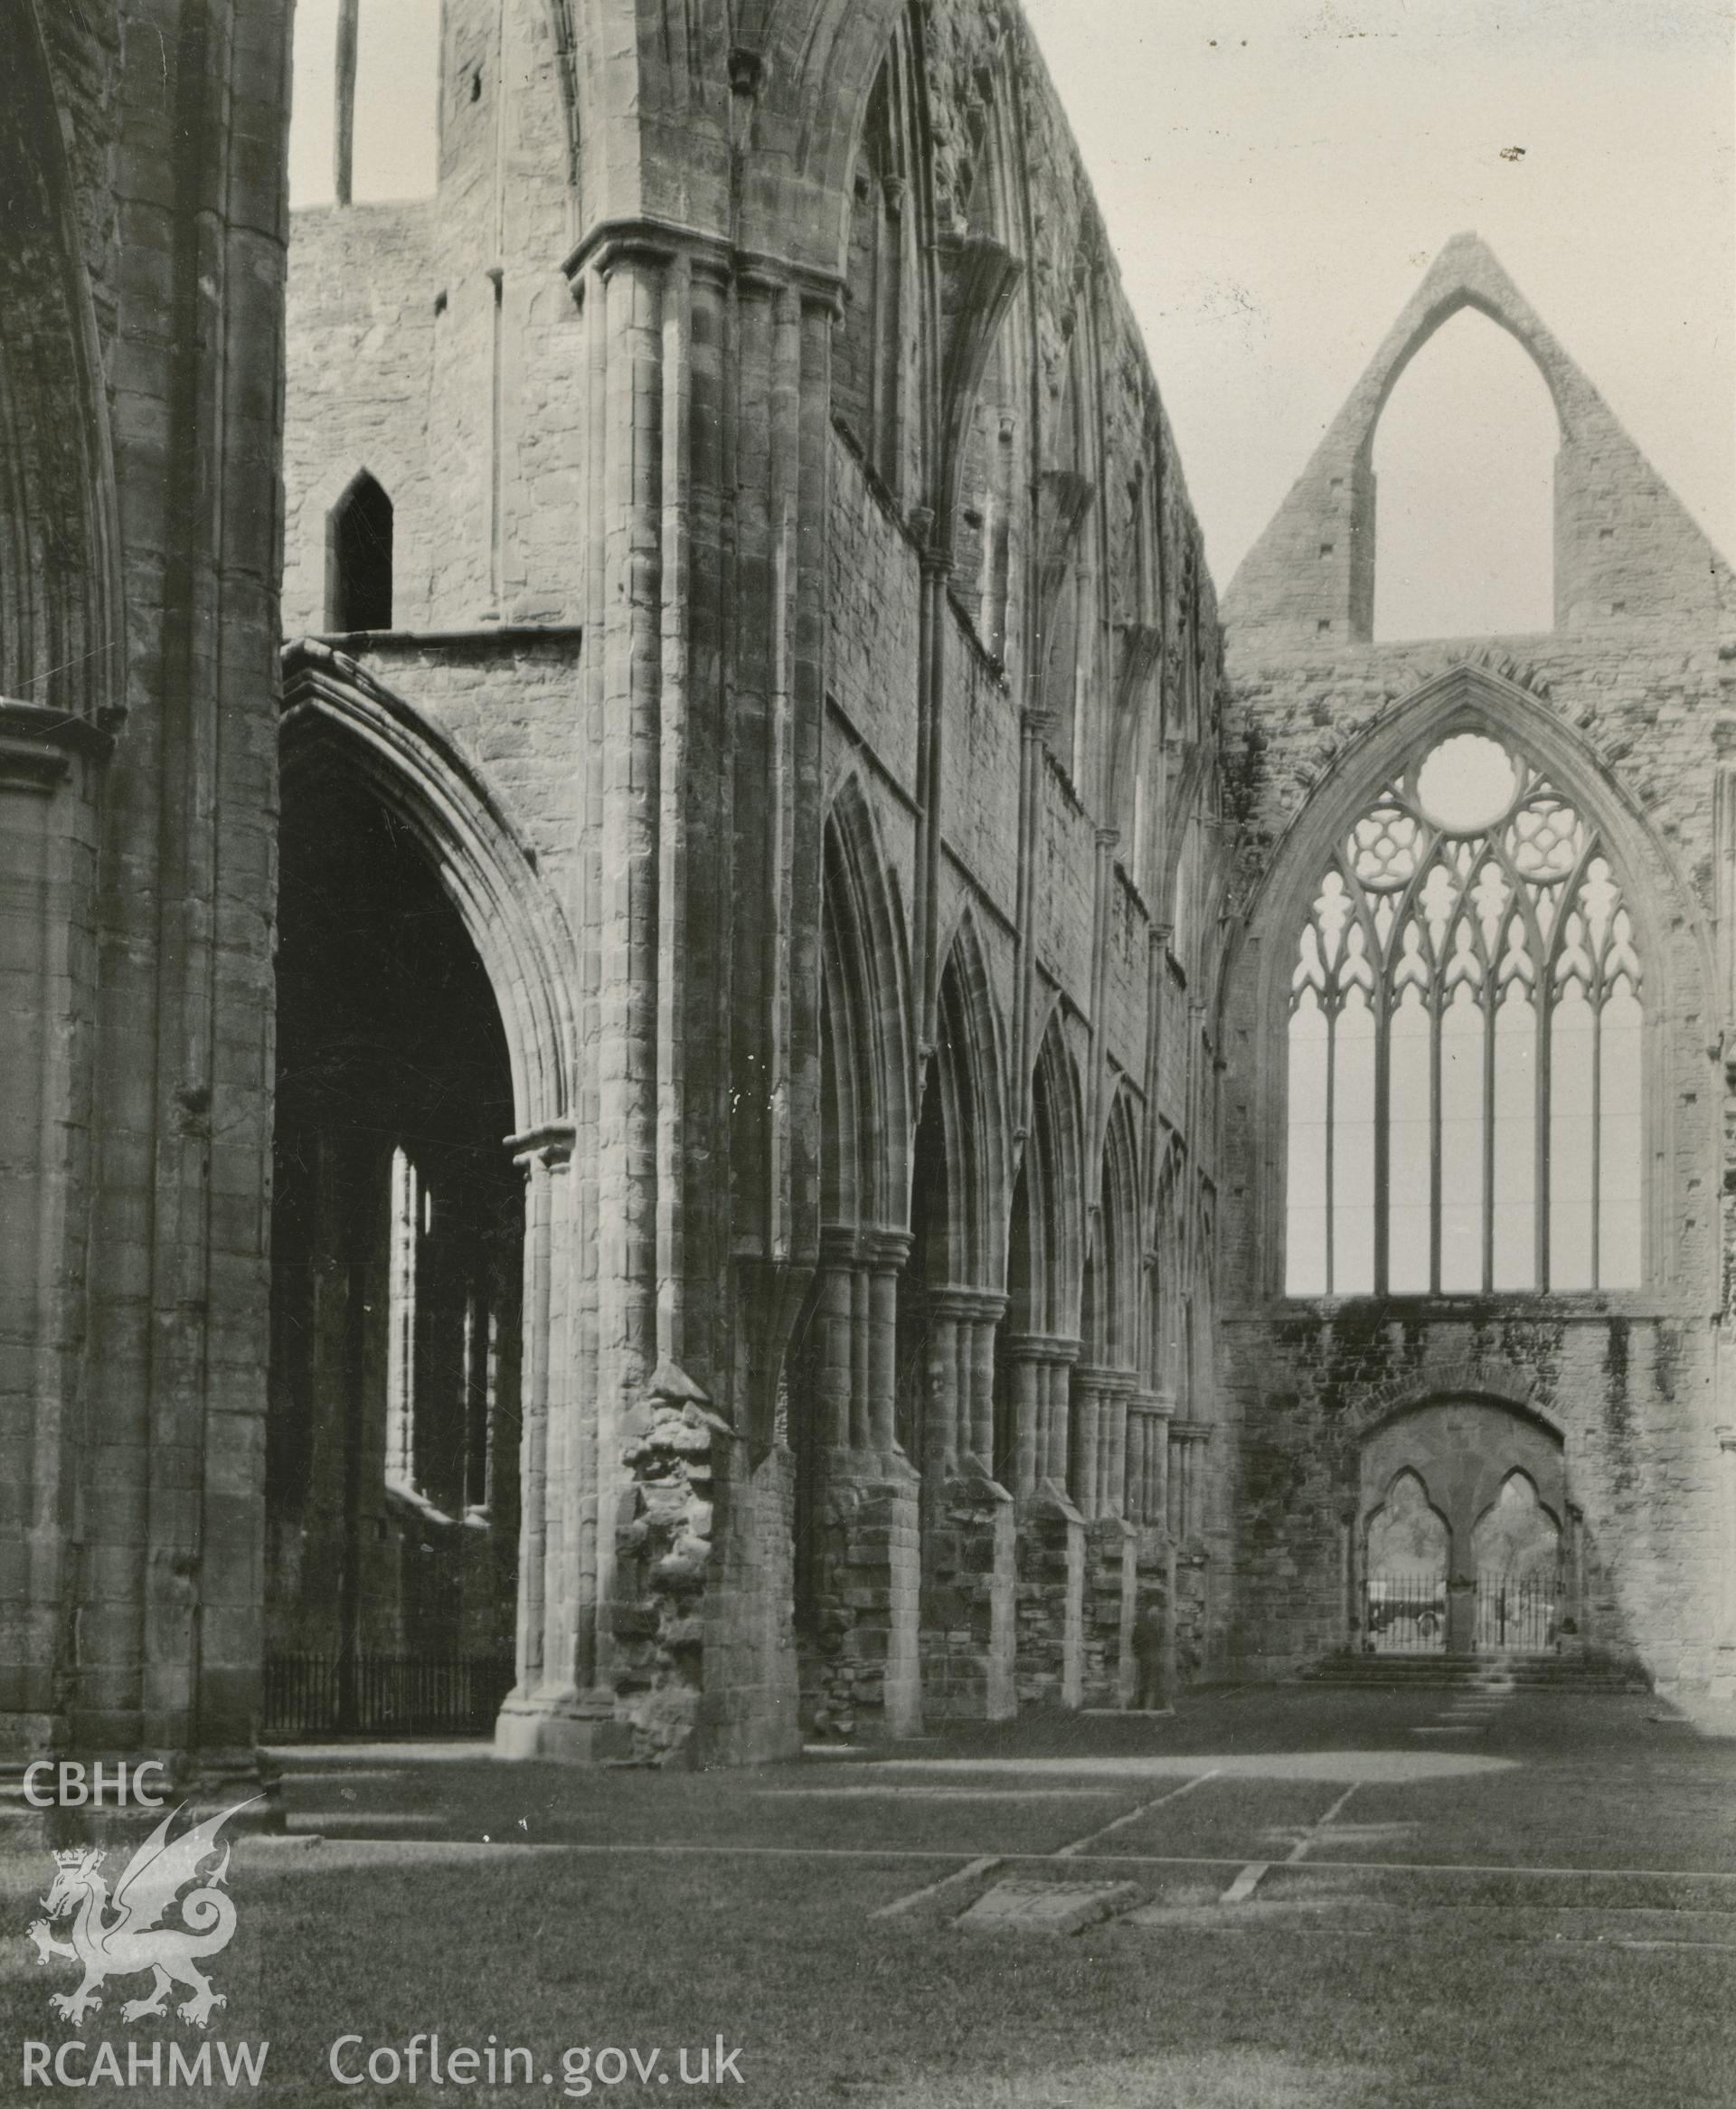 Digital copy of an interior view of Tintern Abbey c1945 from Miss Rose Graham.